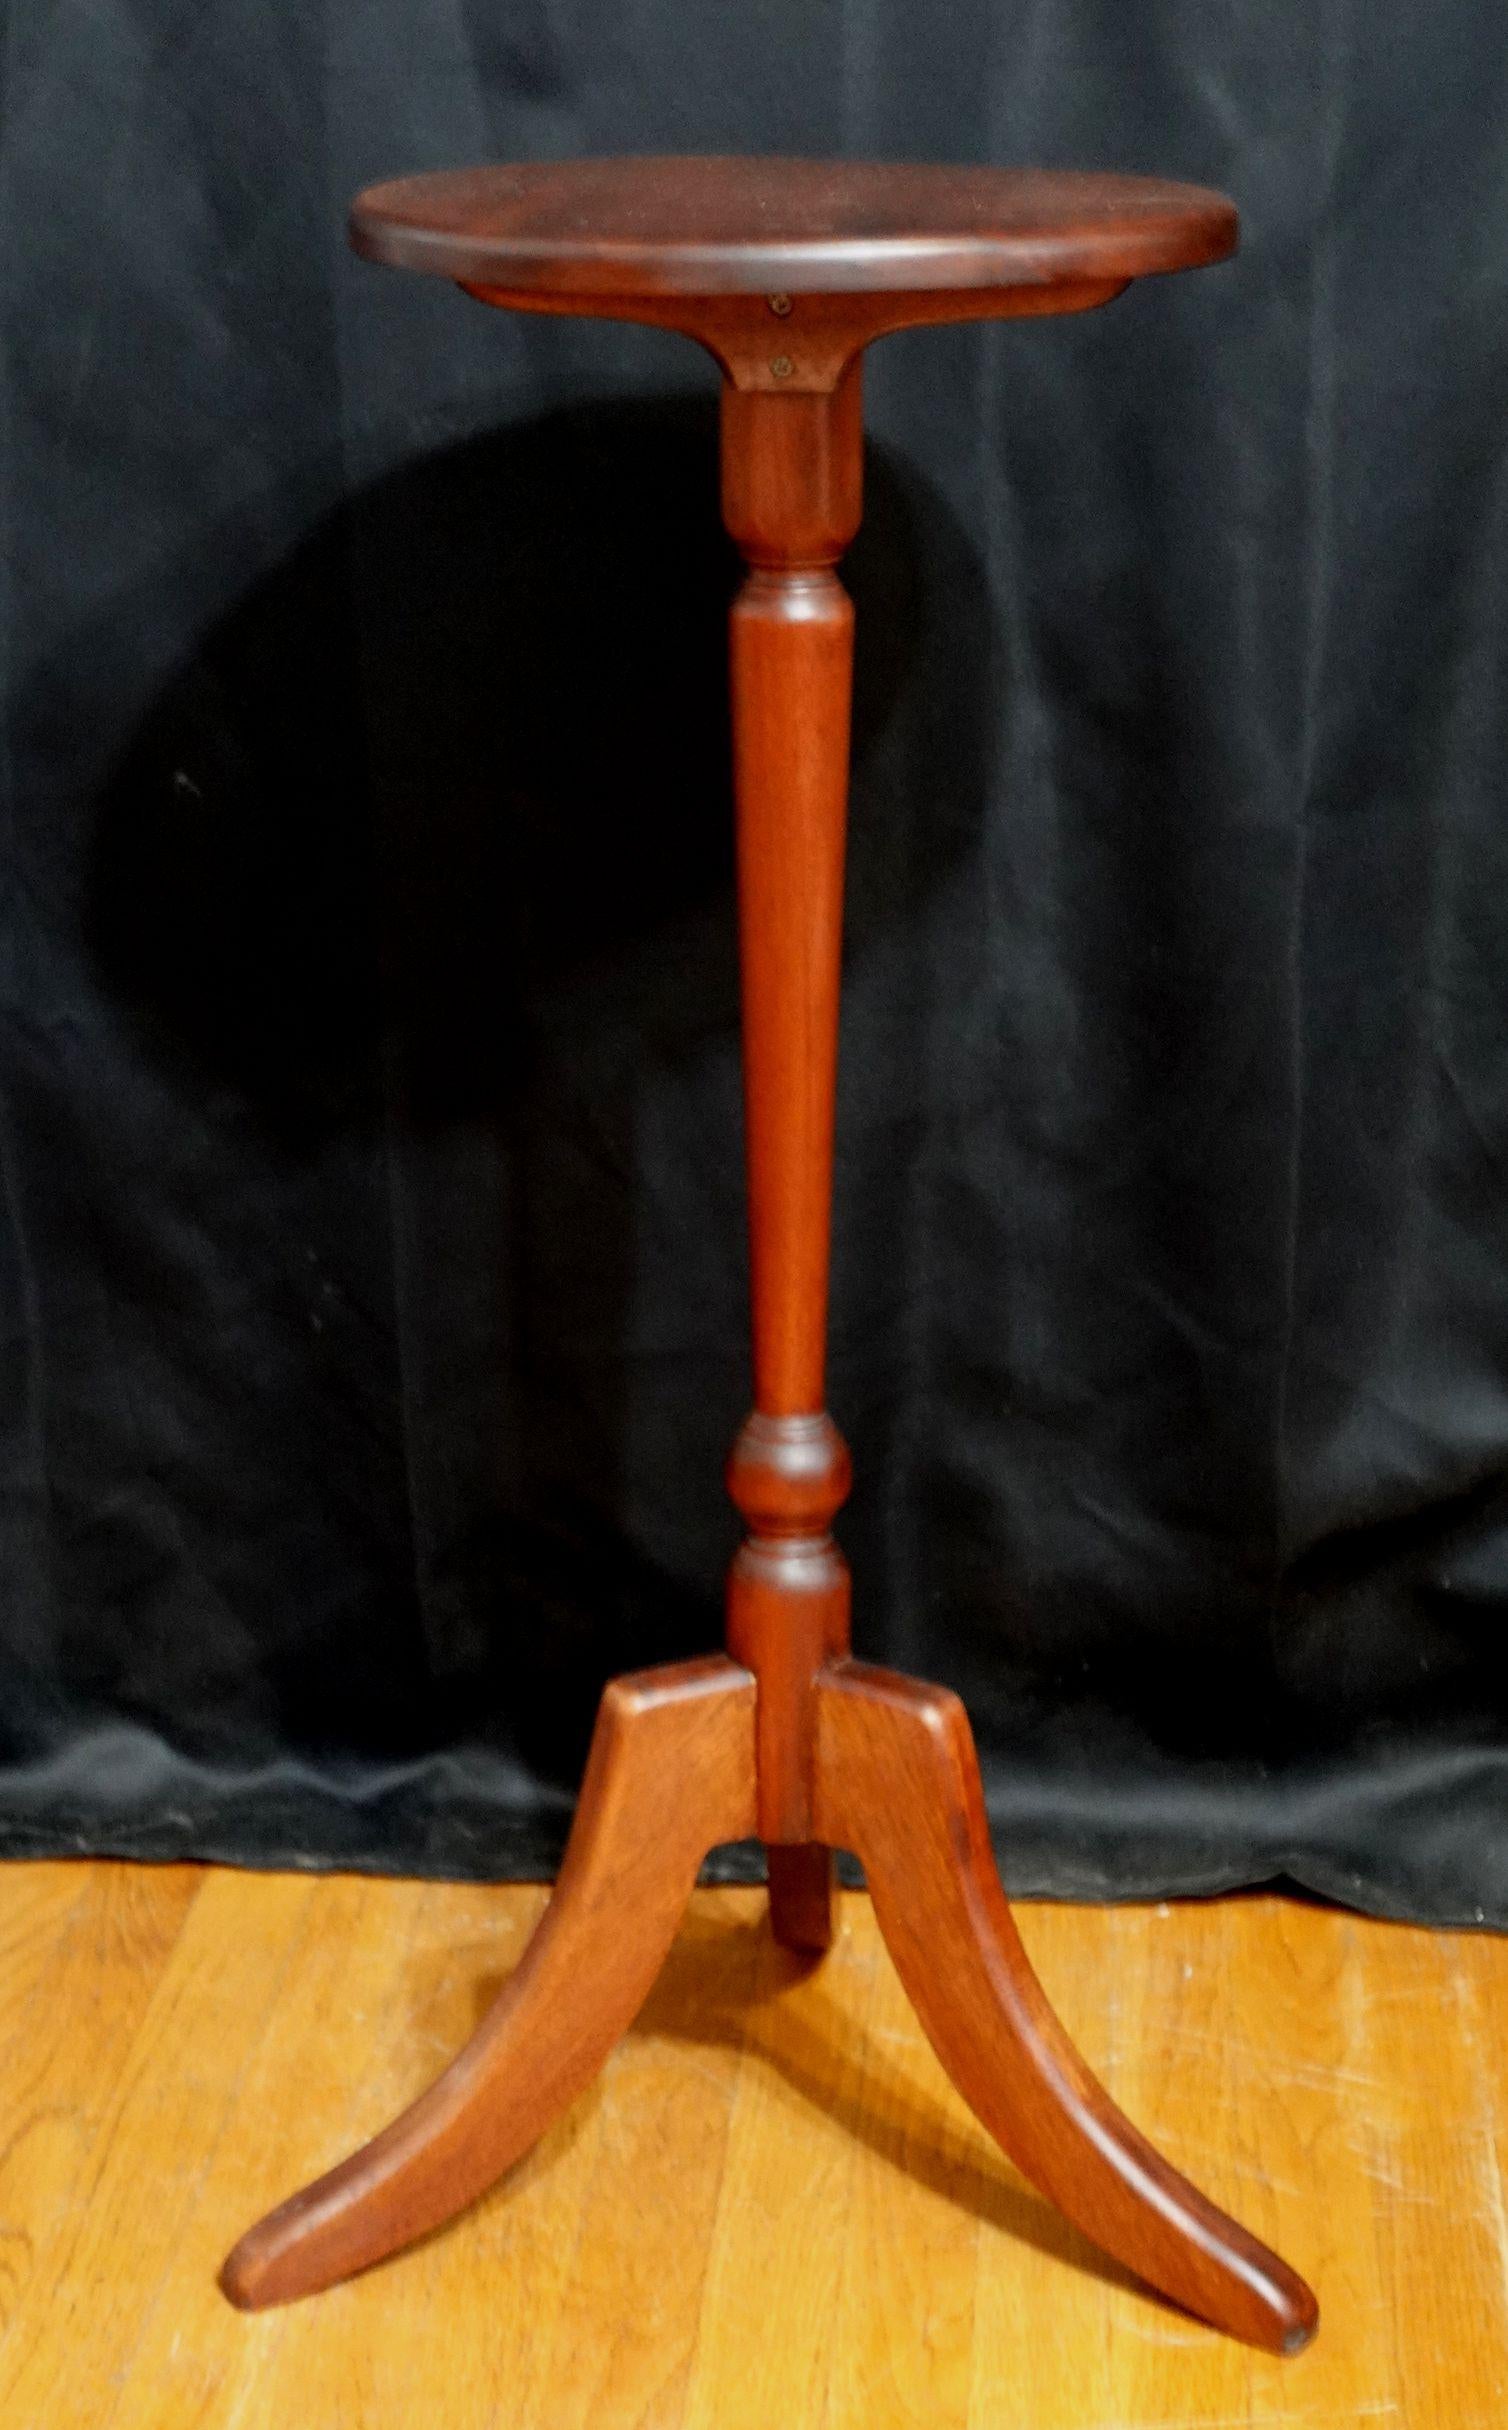 Very unusual solid and stable 18th century mahogany tripod candle stand.
Measures: 34 x 13 1/2 inches.